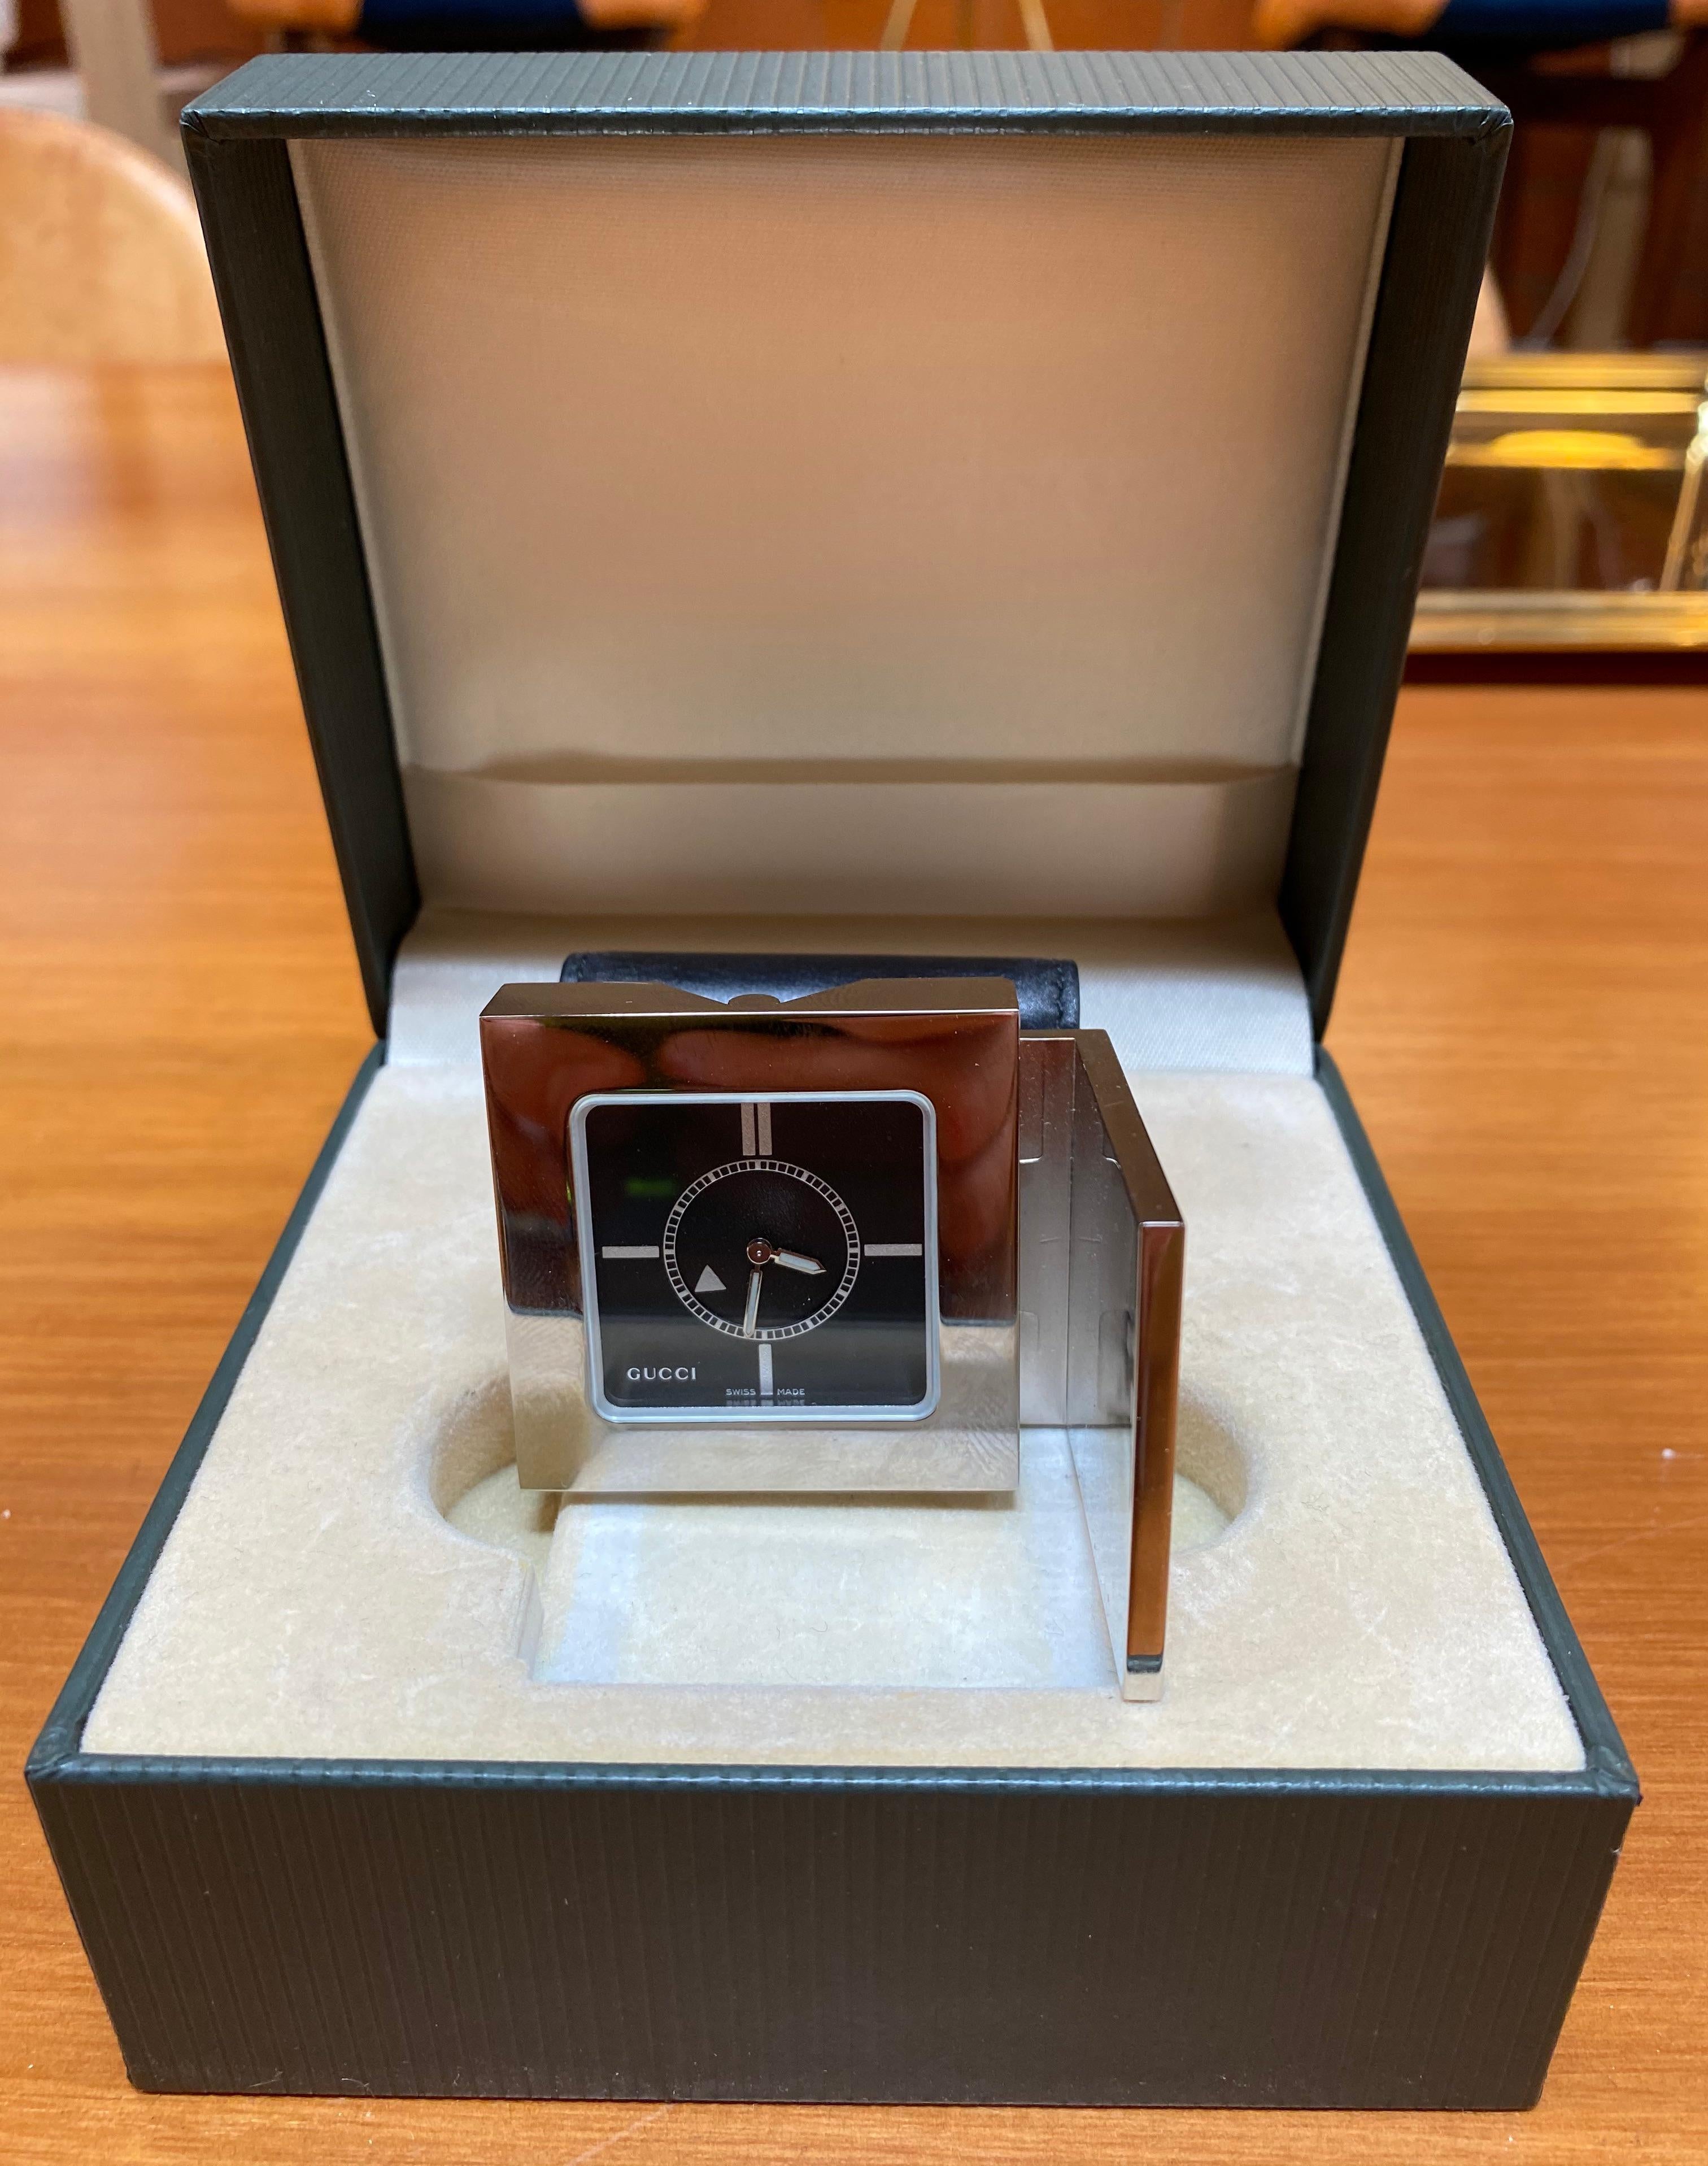 Rare authentic Gucci deluxe chrome cased pocket size, alarm travel clock watch that folds out to stand. Alarm indication on rotation, number 3895 engraved on back, model 0895, Swiss made quartz movement. Comes in soft leather calfskin pouch with